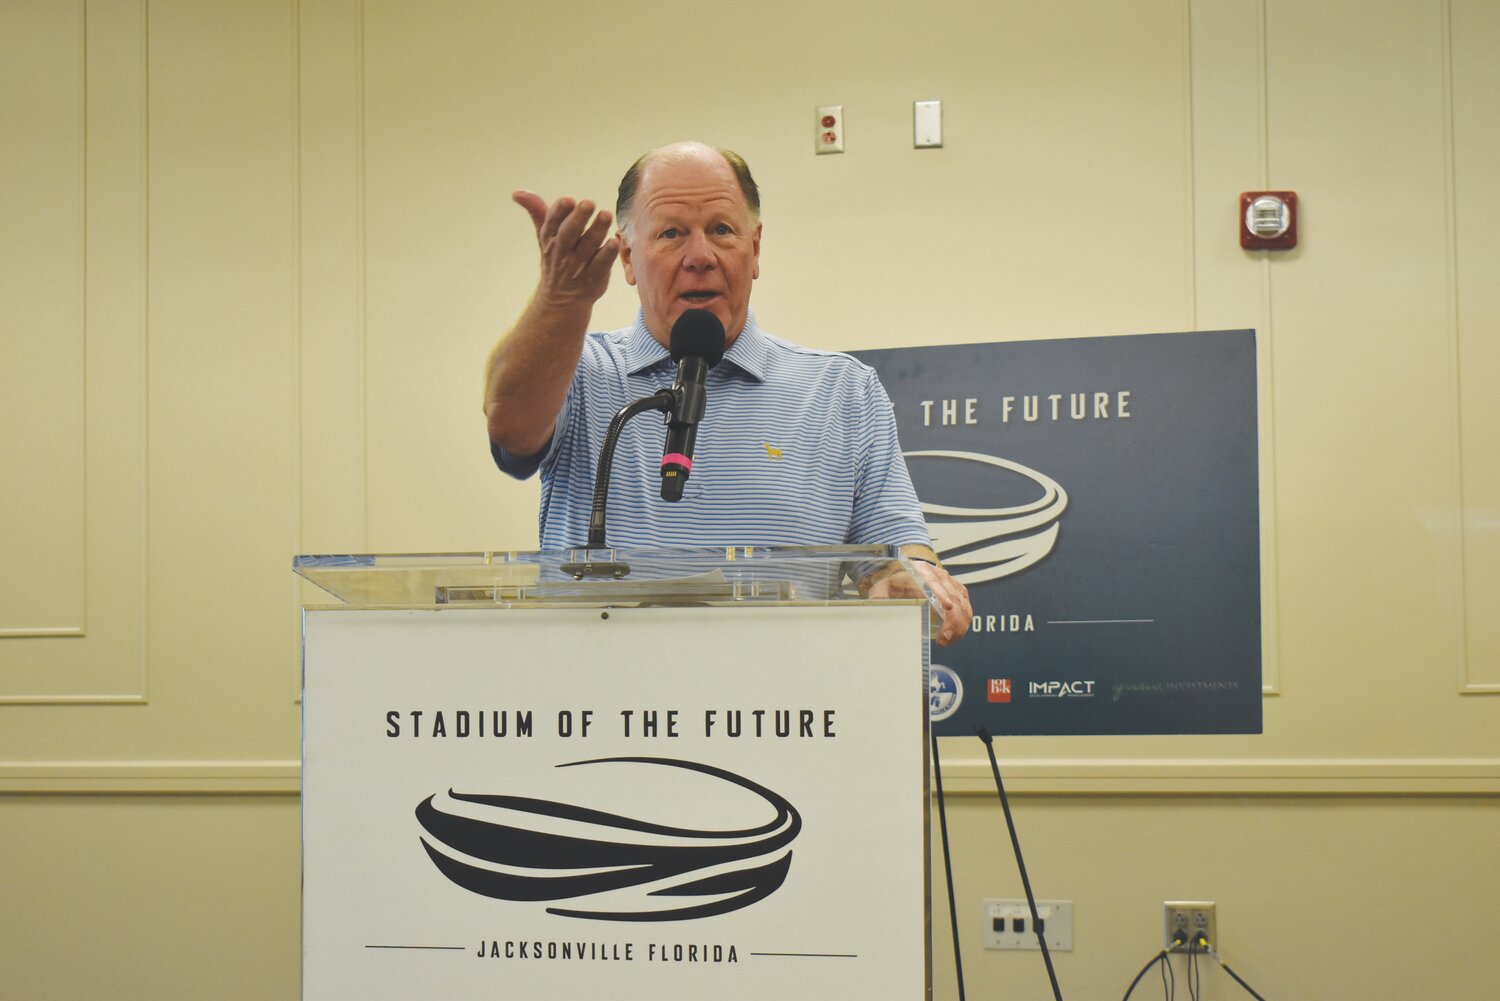 On Monday, Jacksonville Jaguars President Mark Lamping brought his team’s vision for a future stadium to the Thrasher-Horne Center. He said the biggest fanbase of season ticket holders is in Clay County, so he was enlisting suggestions ahead of a planned re-opening for the 2028 season.